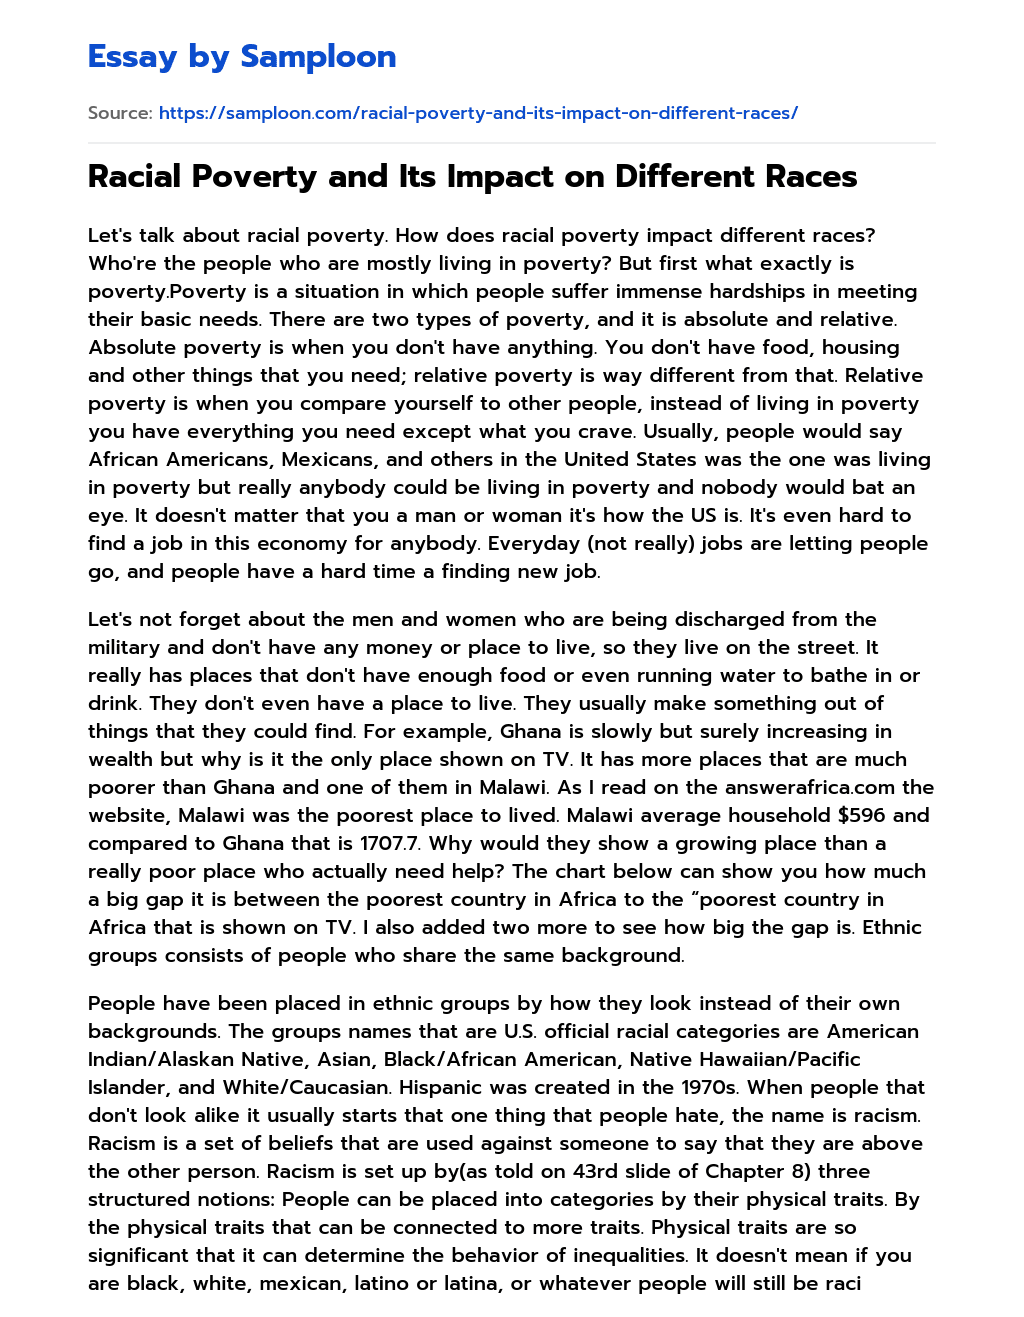 Racial Poverty and Its Impact on Different Races essay